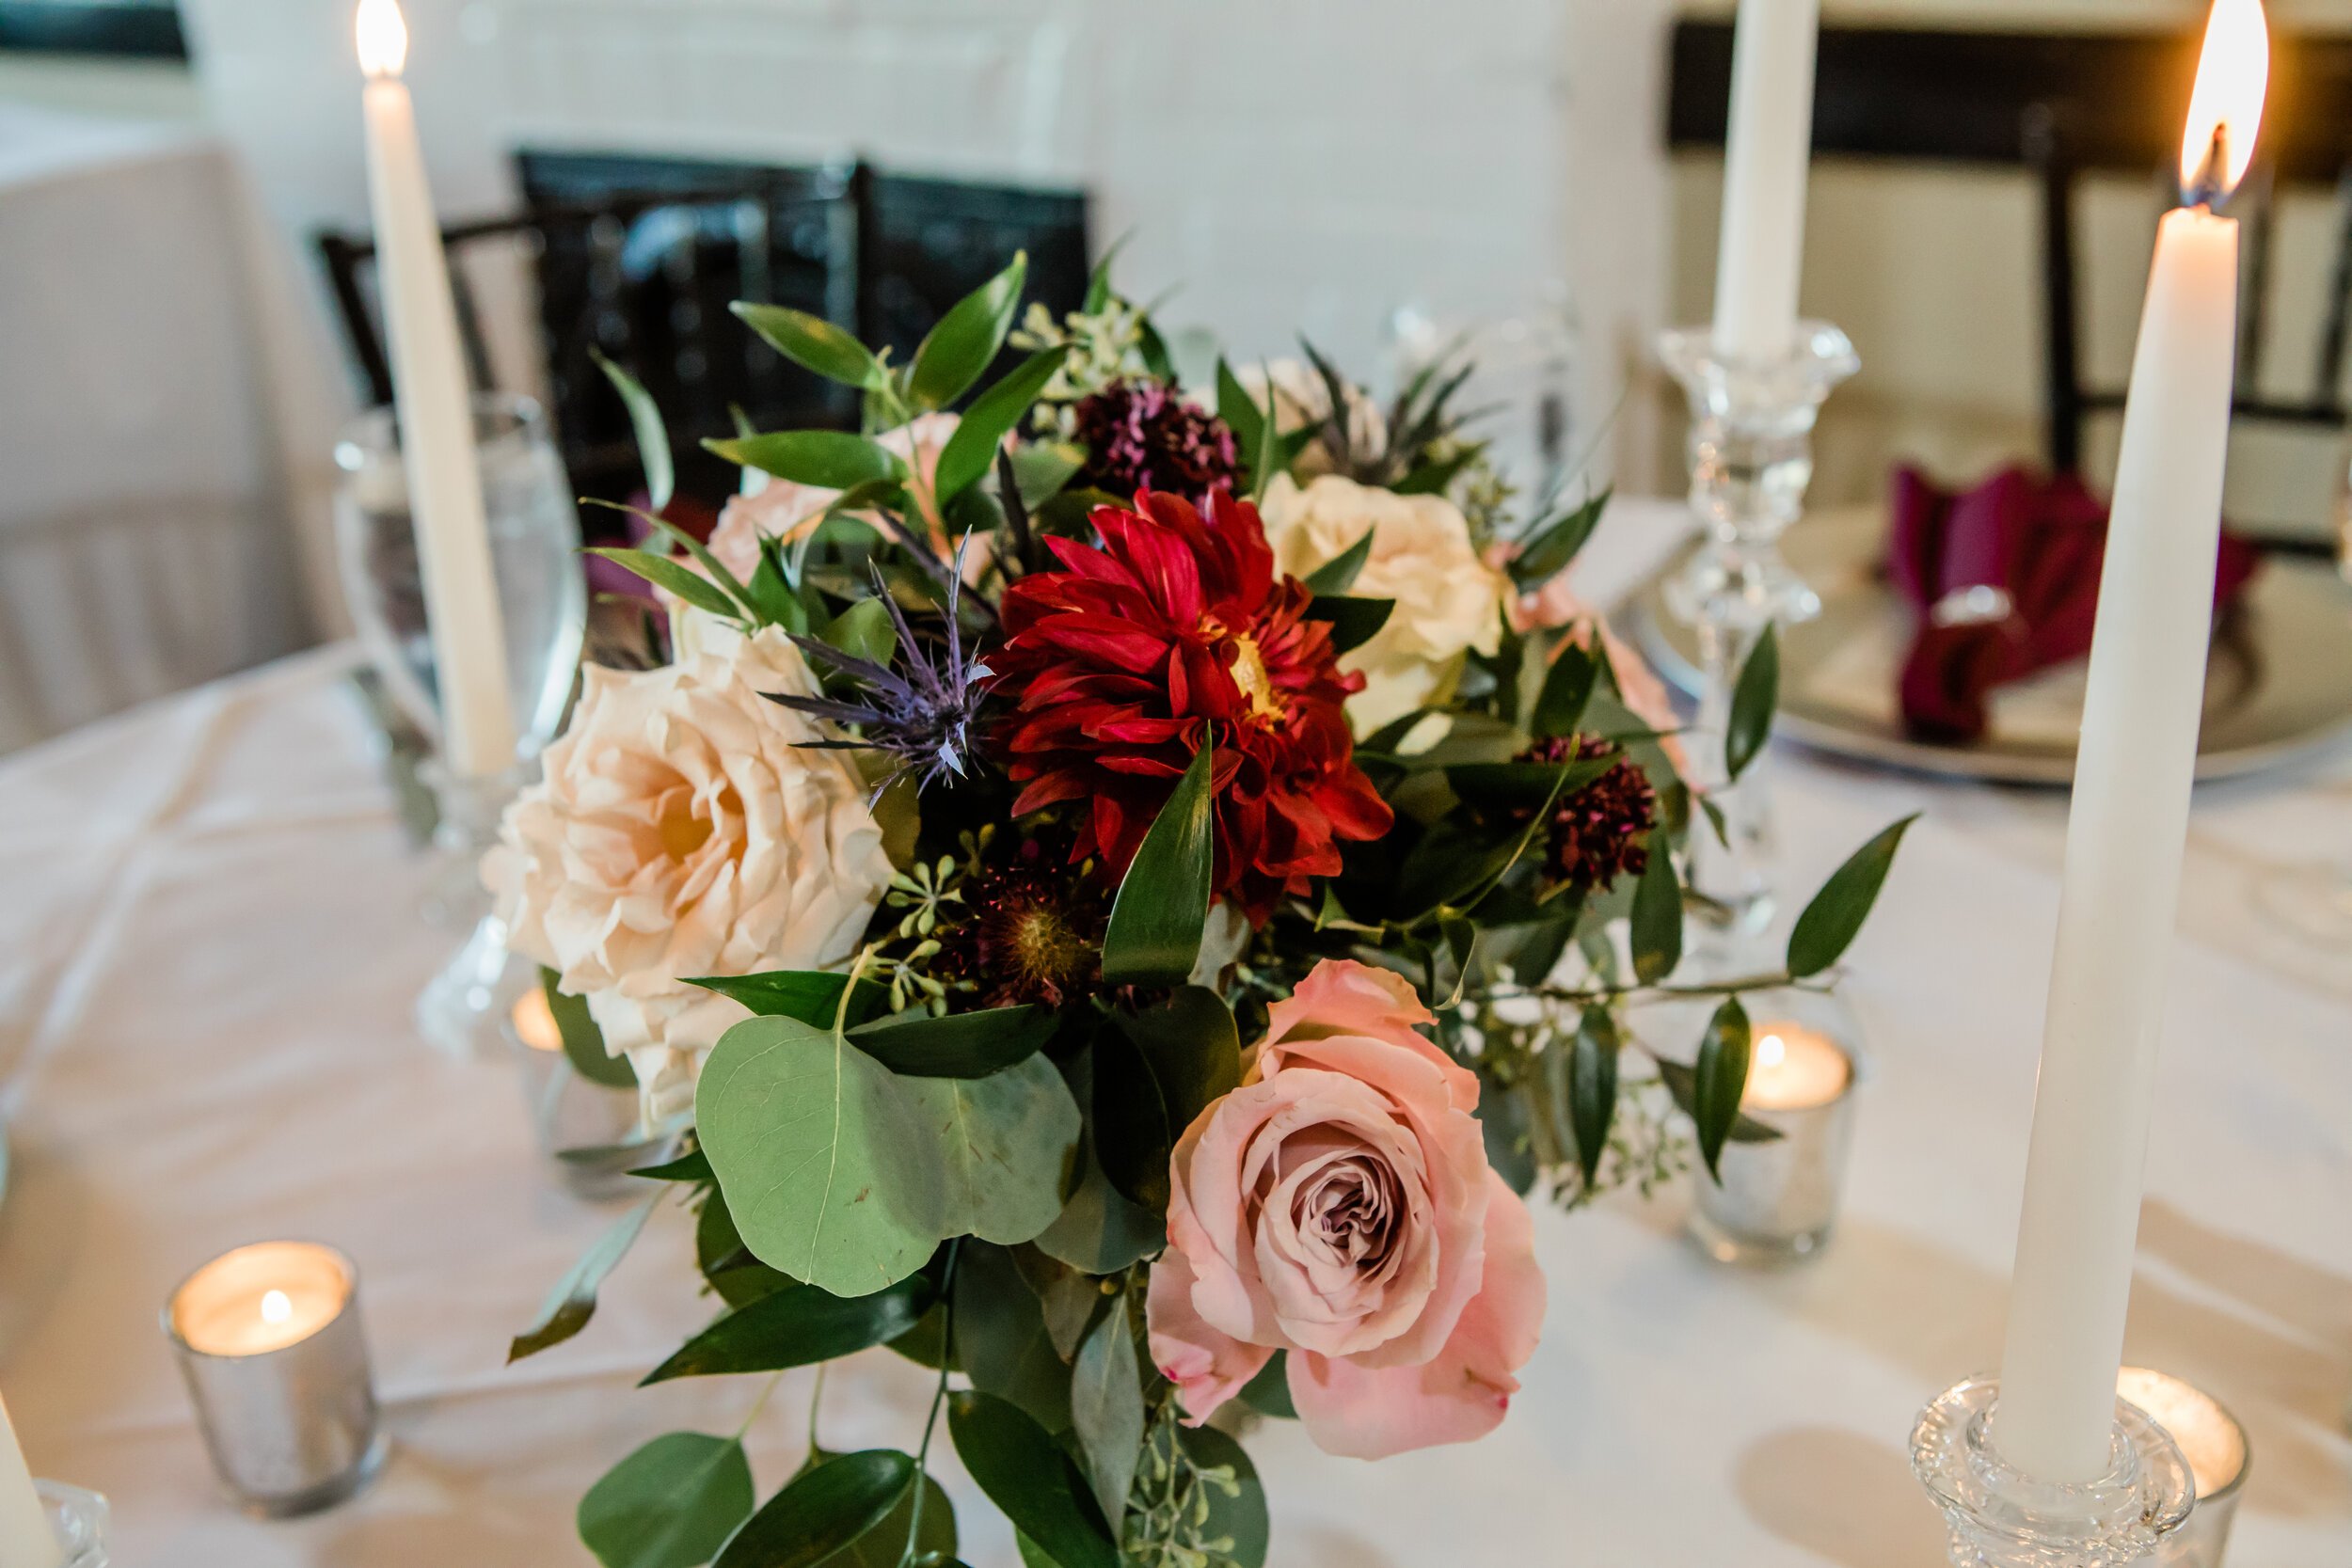 ivory-and-beau-florals-kendall-and-michael-savannah-florist-southern-florist-wedding-flowers-wedding-florals-savannah-wedding-southern-wedding-davenport-house-vics-on-the-river-Reception-6.jpg